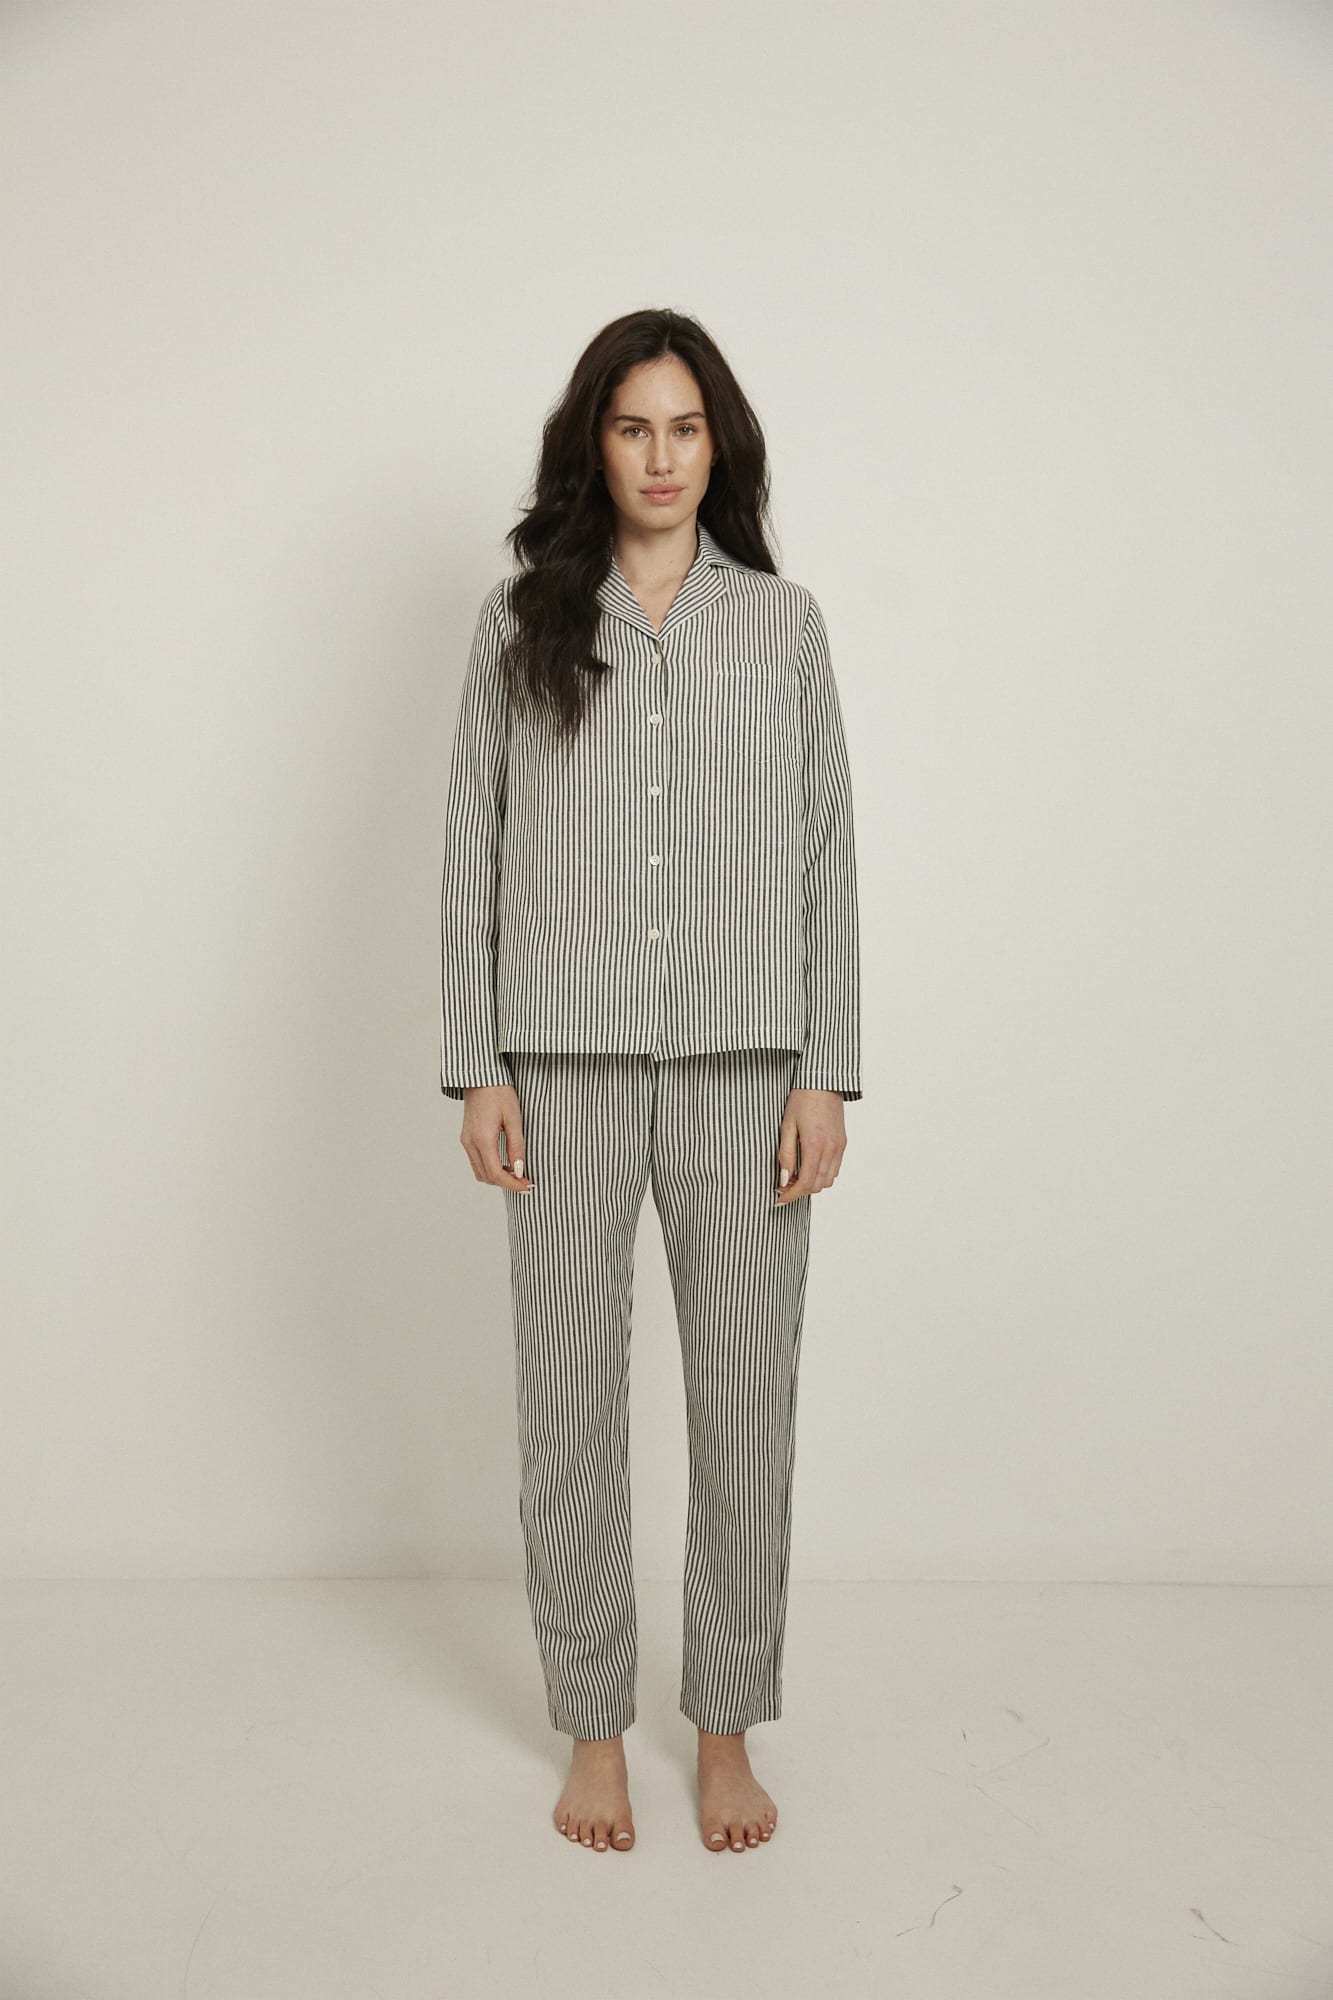 Women’s pyjama set including a long sleeve shirt and long sleeve pants. Made from an organic cotton and linen blend, in a black and white stripe.  The shirt has shell buttons, a front pocket and a back pleat.  The pants feature an elasticated waistband for comfort.